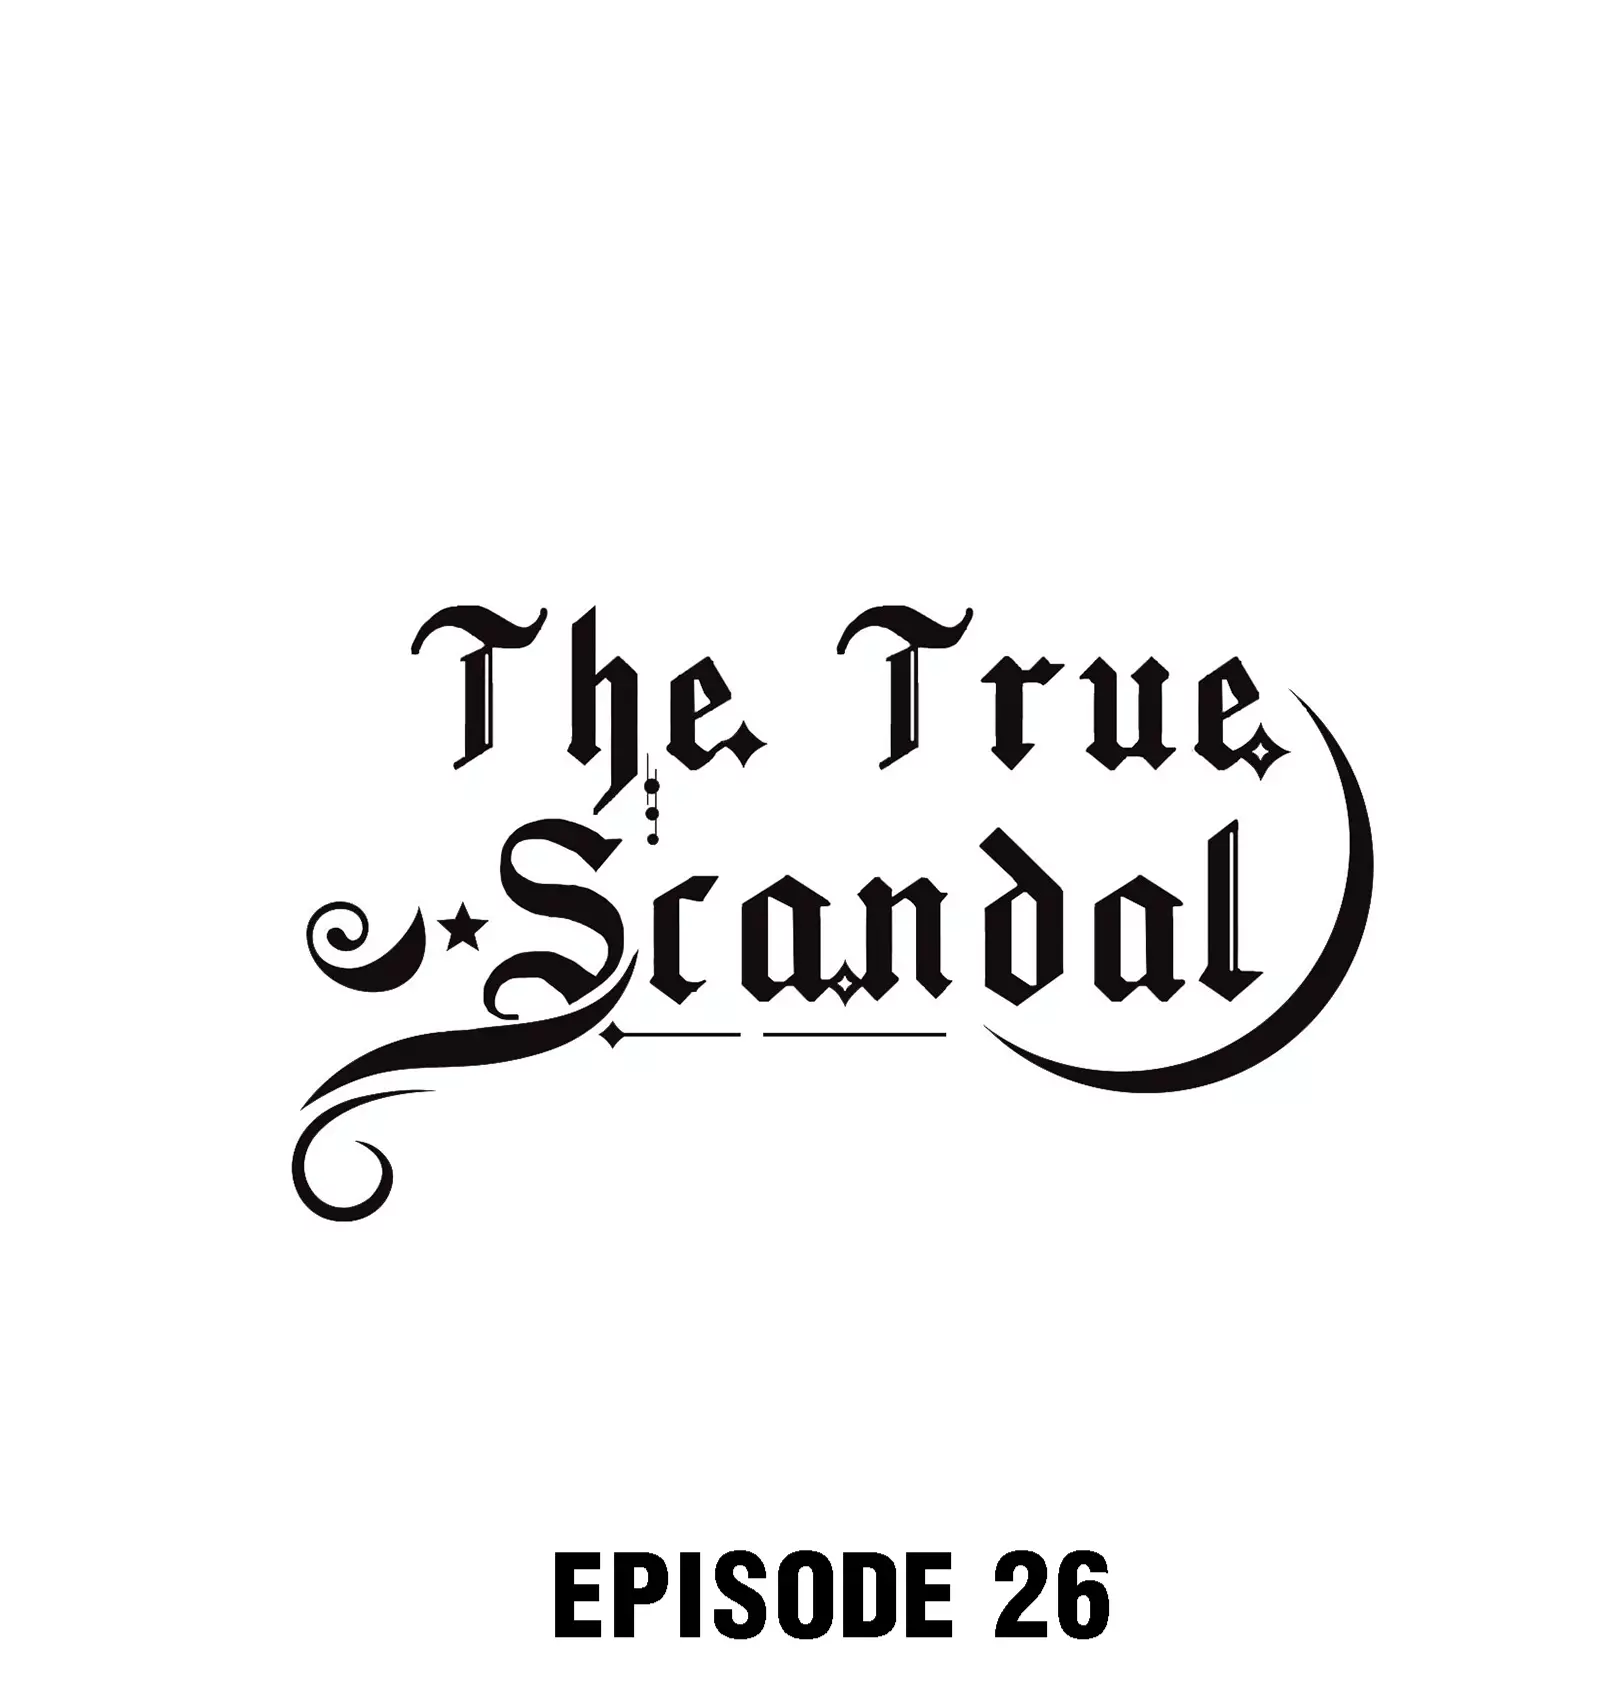 The True Scandal - 26 page 1-0f3a7123